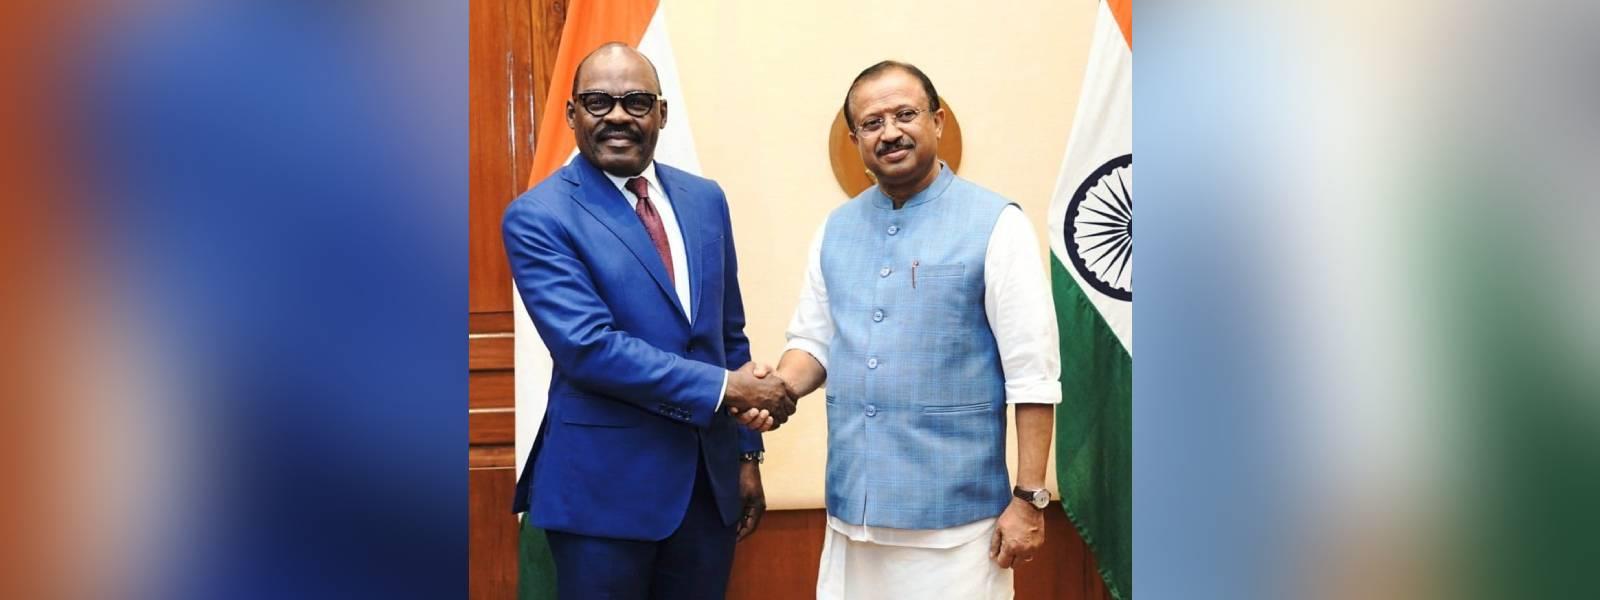 Minister of State for External Affairs Shri V. Muraleedharan welcomes the delegation from the Democratic Republic of Congo led by H.E. Mr. Nicolas Kadima Kazadi NZUJI, Minister of Finances in New Delhi